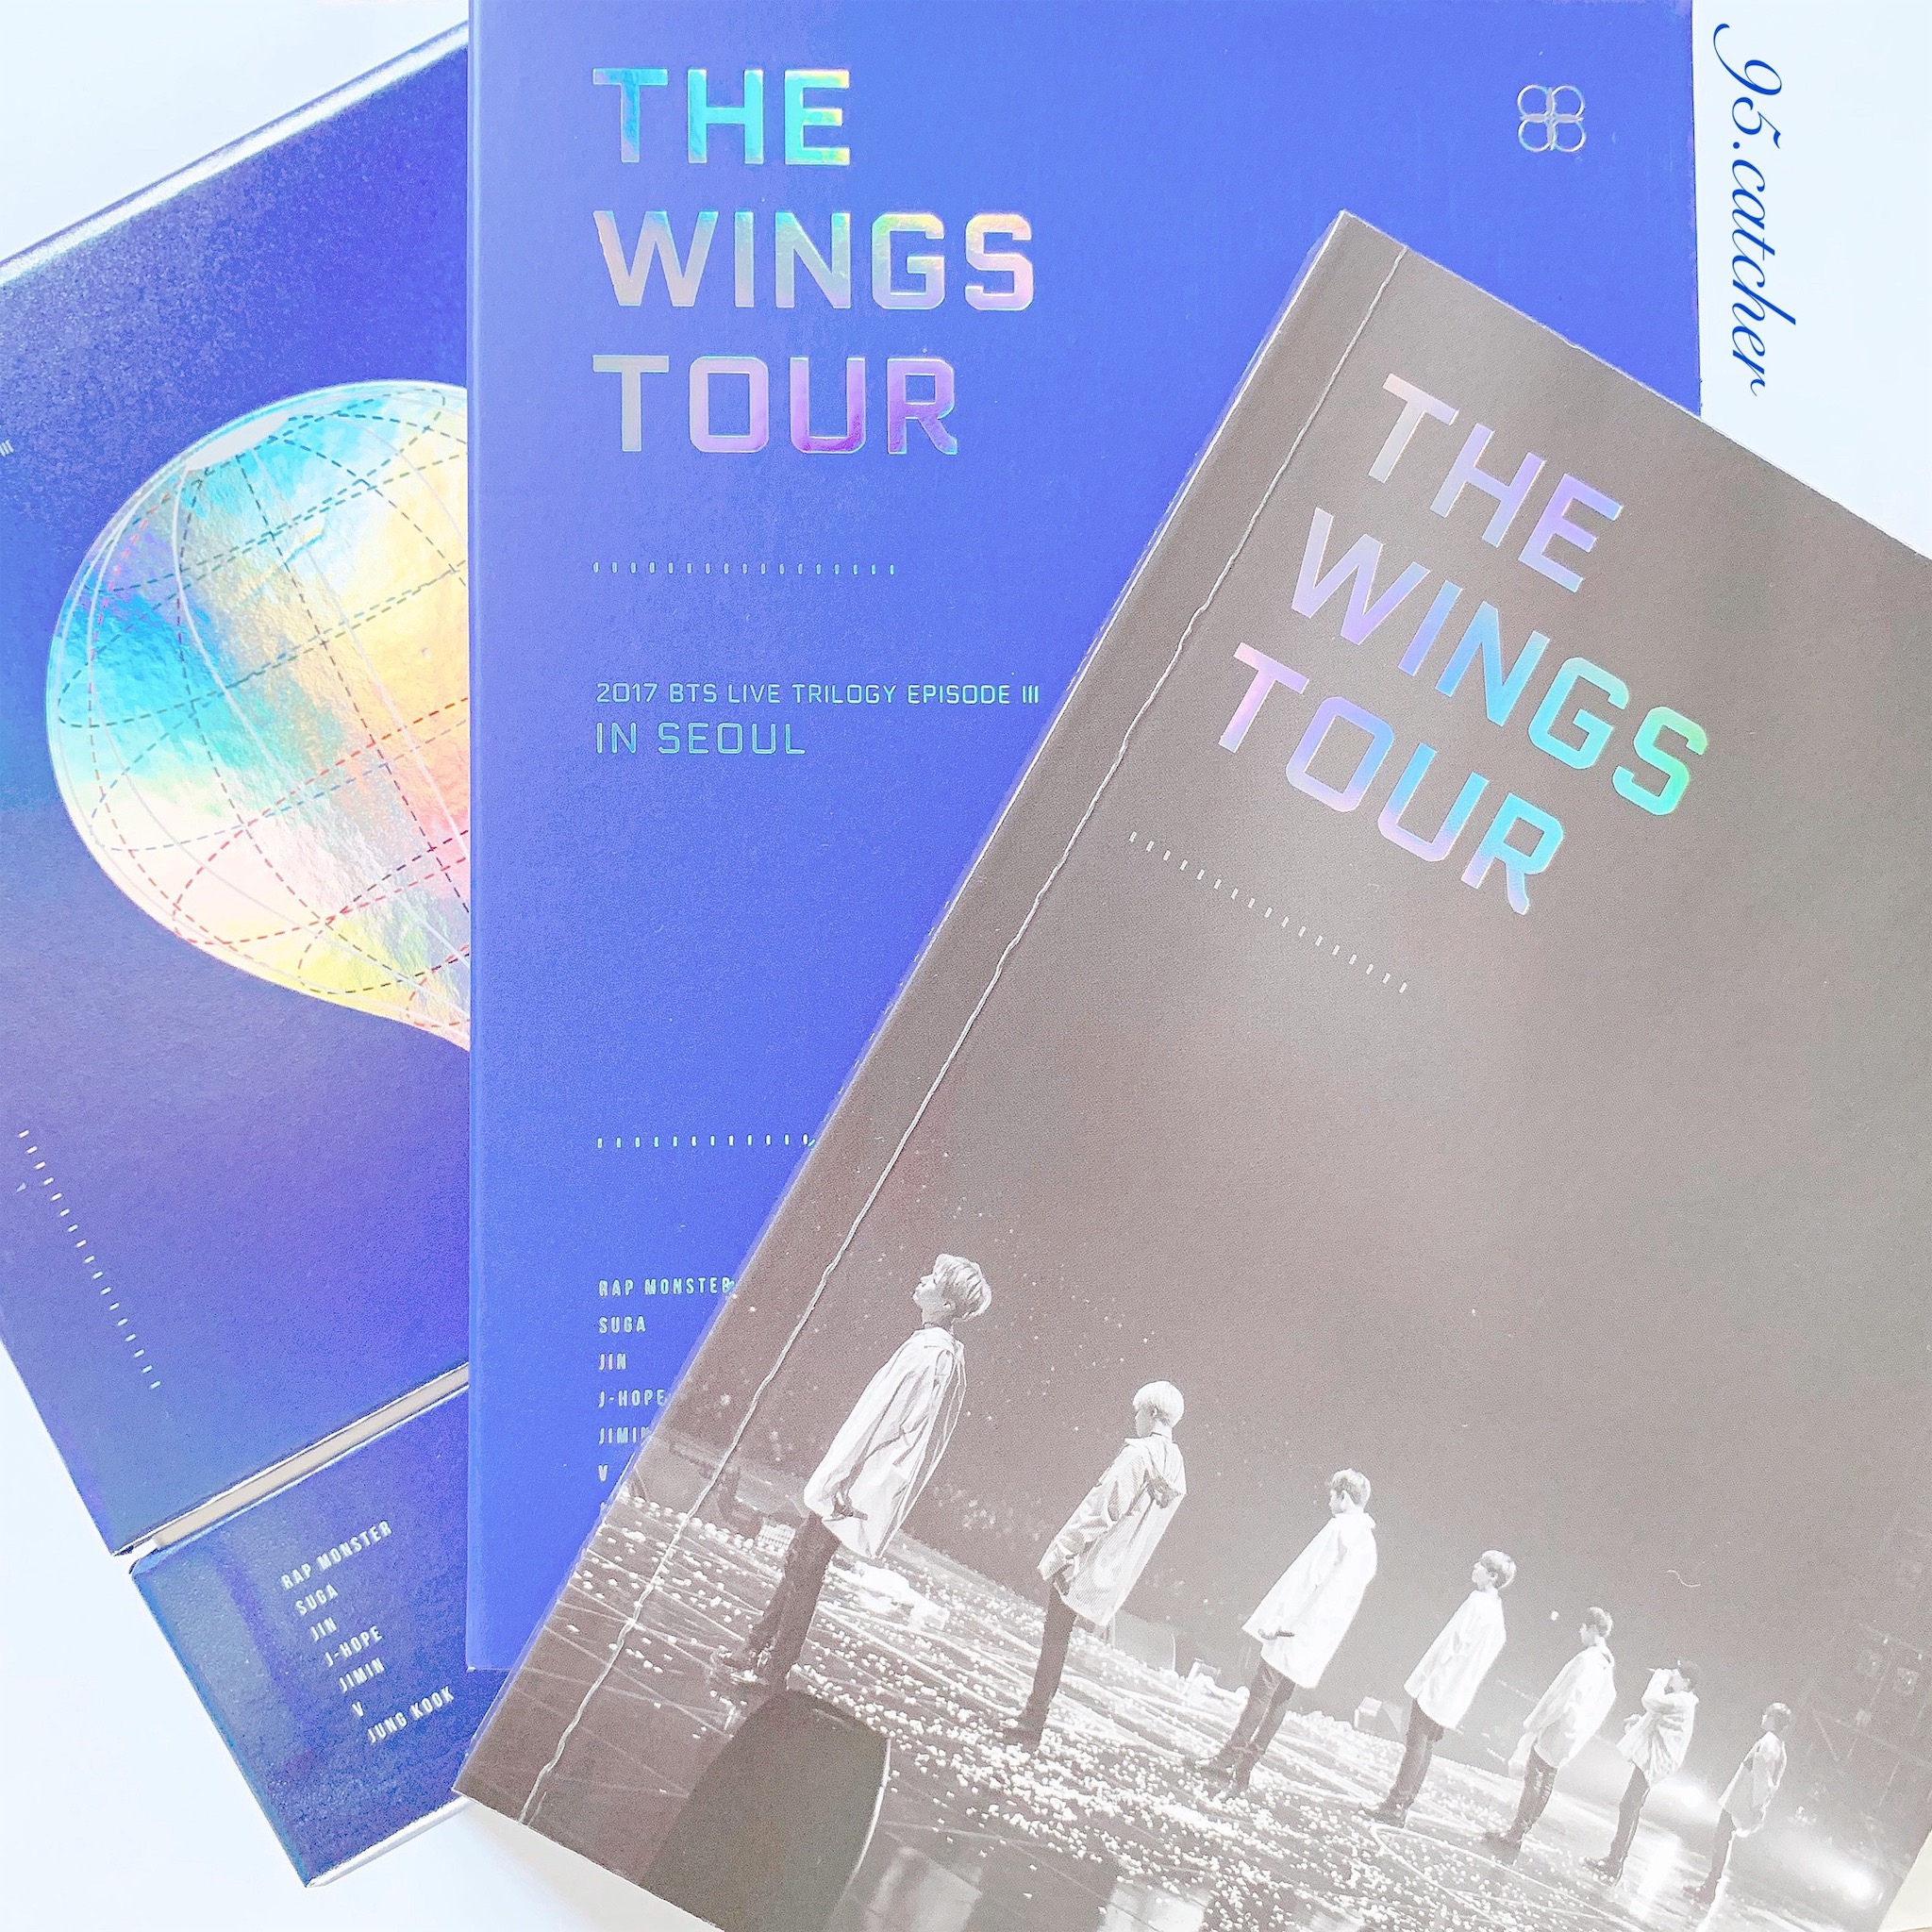 《2017 BTS Live Trilogy Episode III The Wings Tour In Seoul》是第 